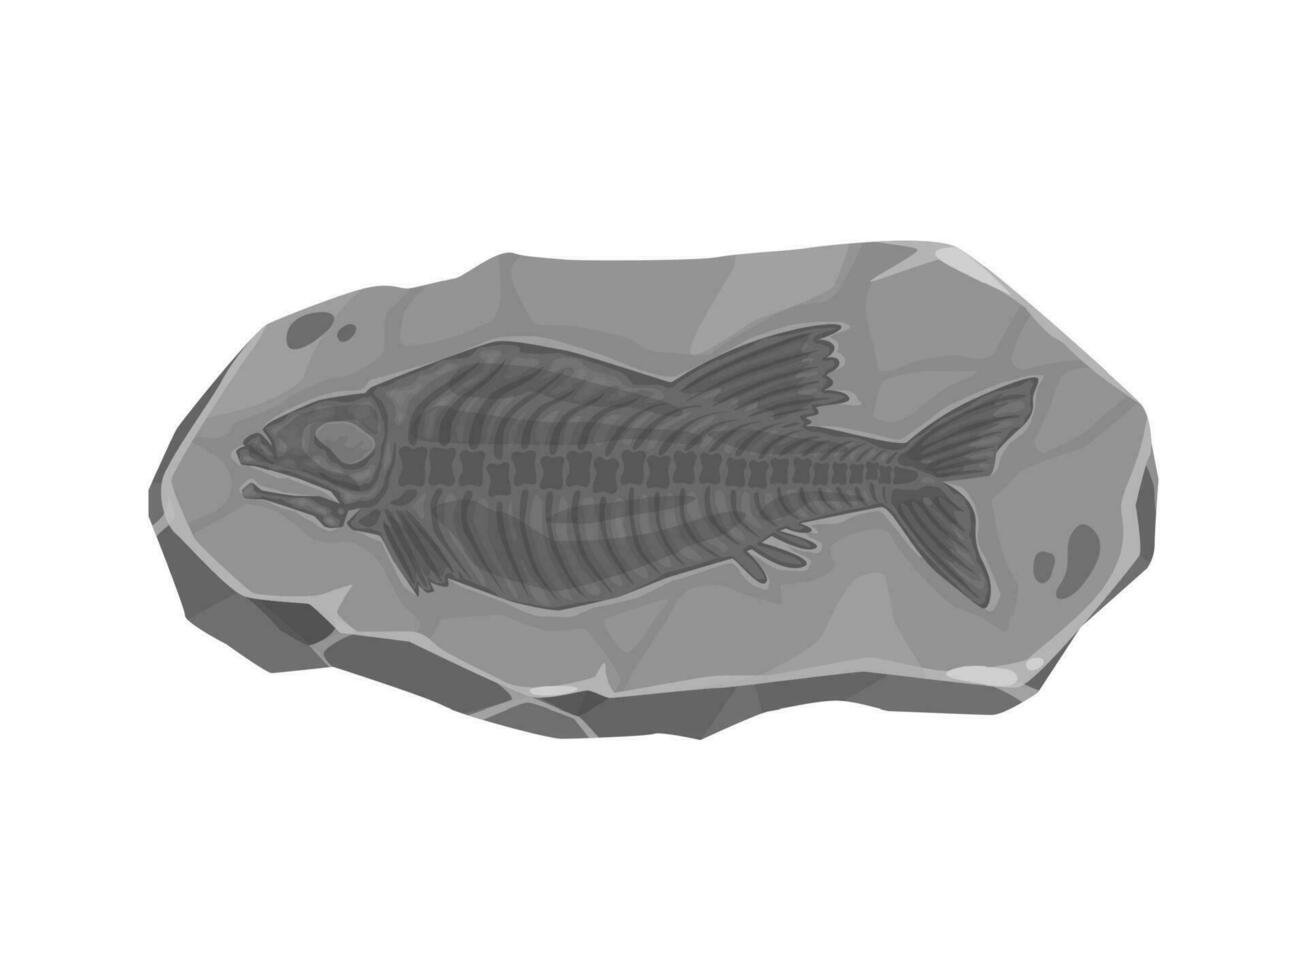 Ancient extinct fish fossil imprint in stone vector